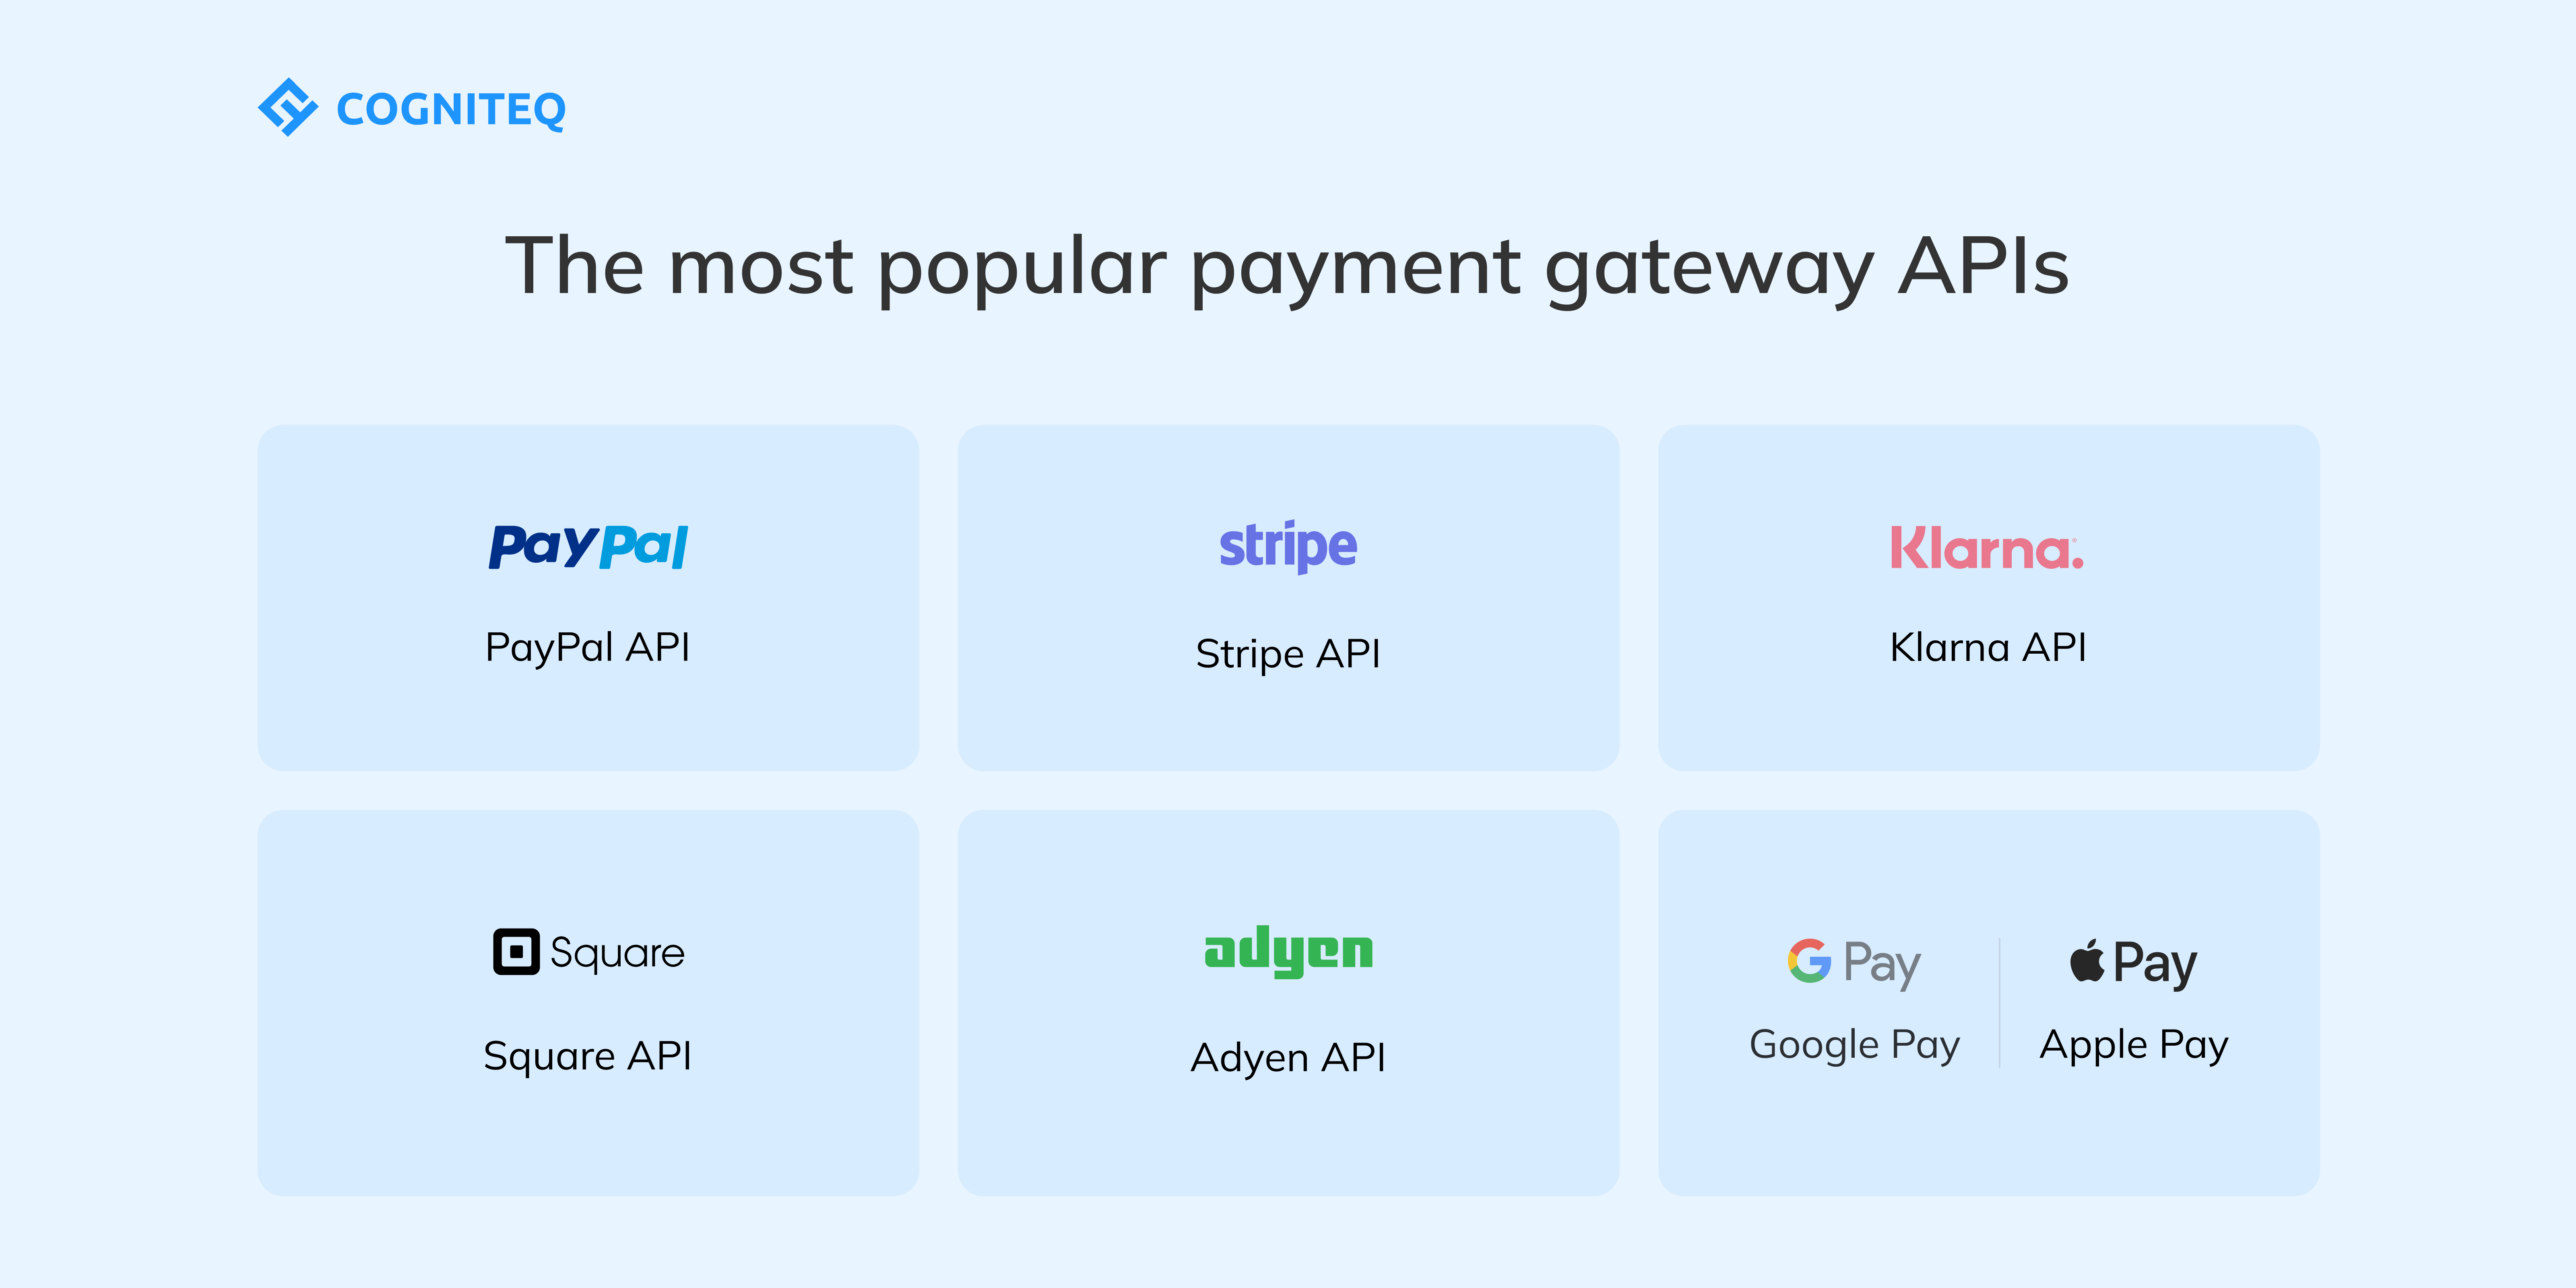 The most popular payment gateway API